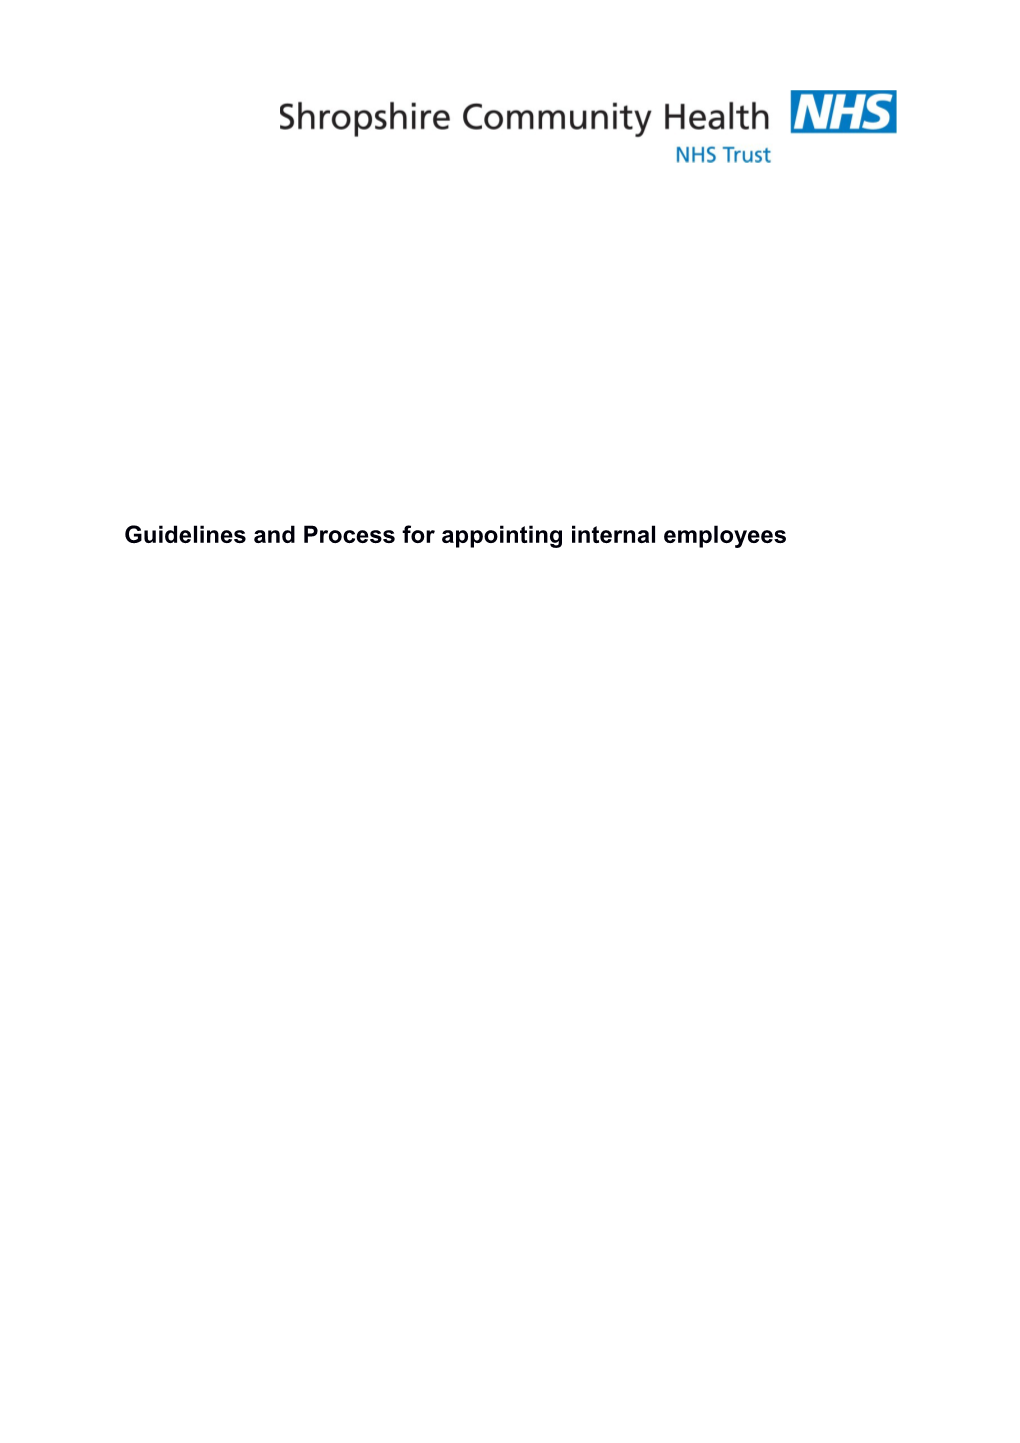 Guidelines and Process for Appointing Internal Employees